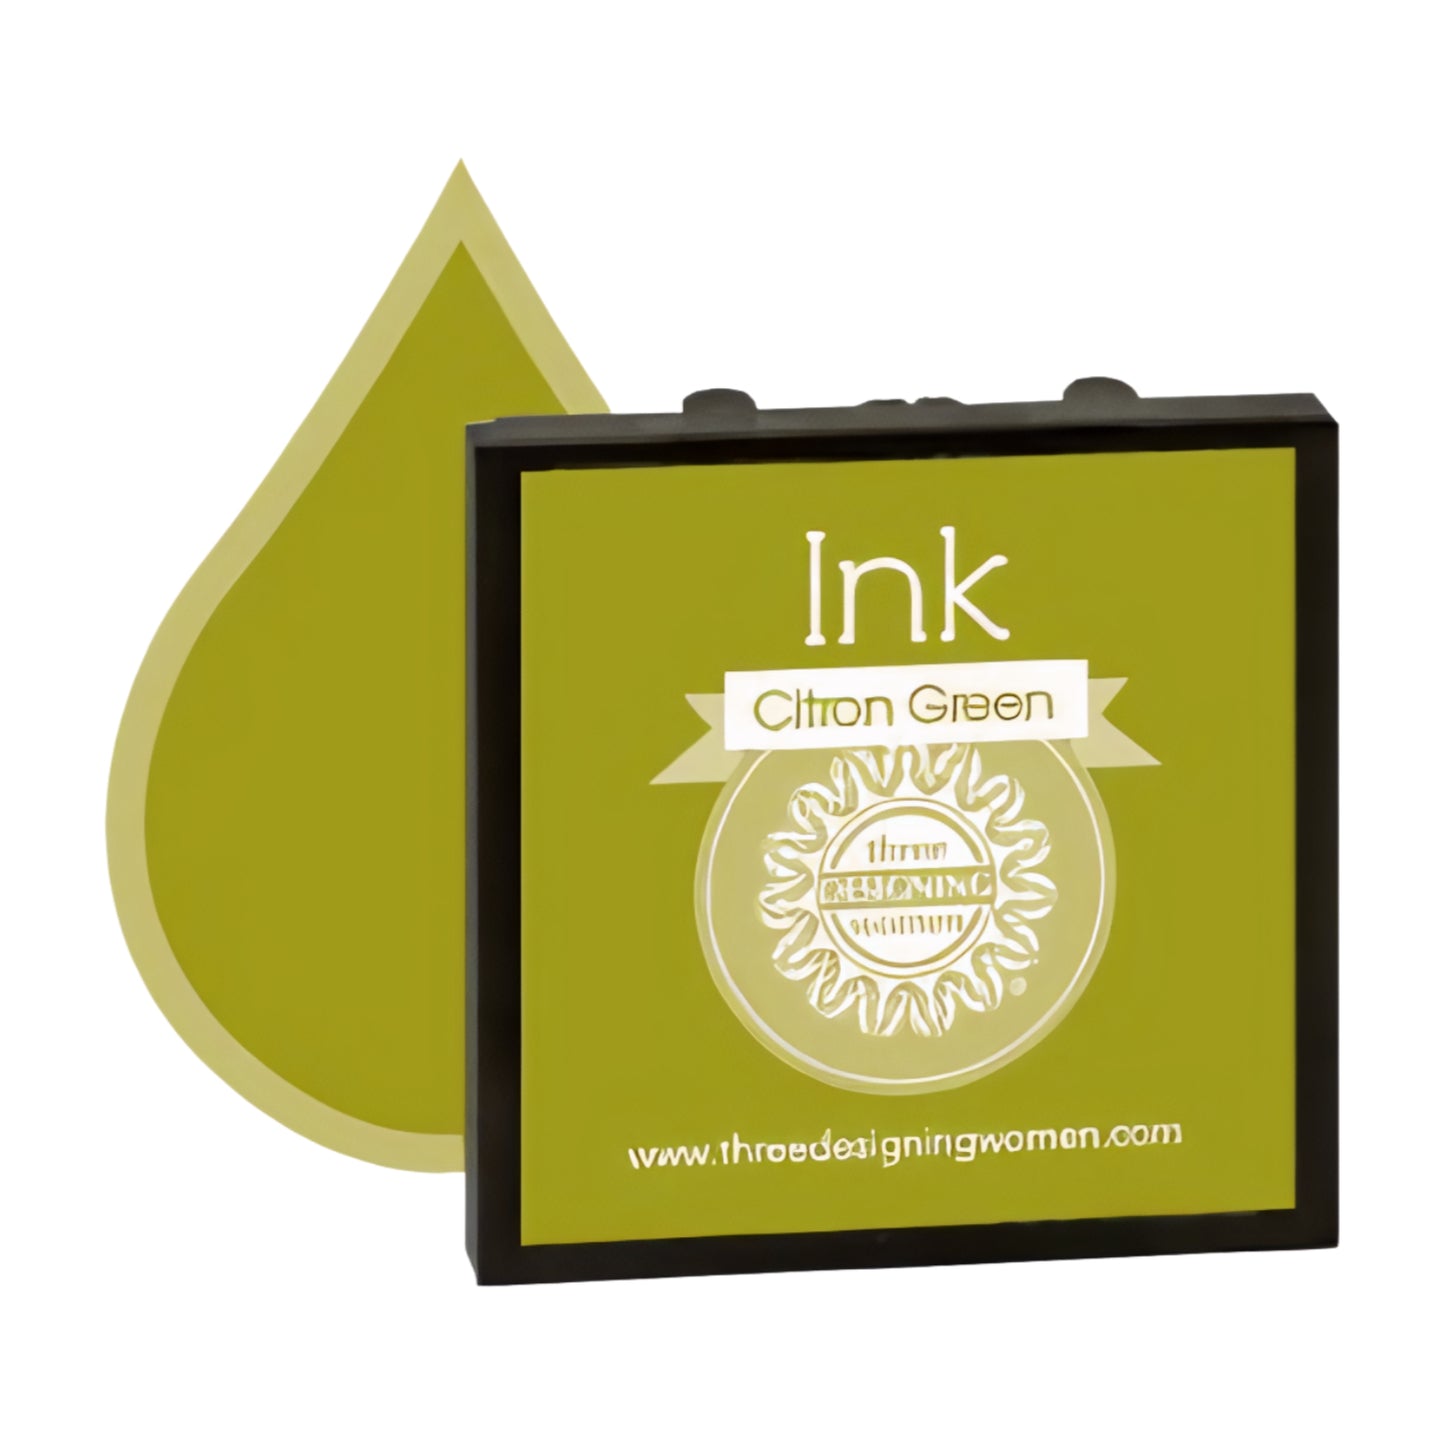 Ink Replacement Cartridge "Citron Green" for Self-Inking Stampers Three Designing Women